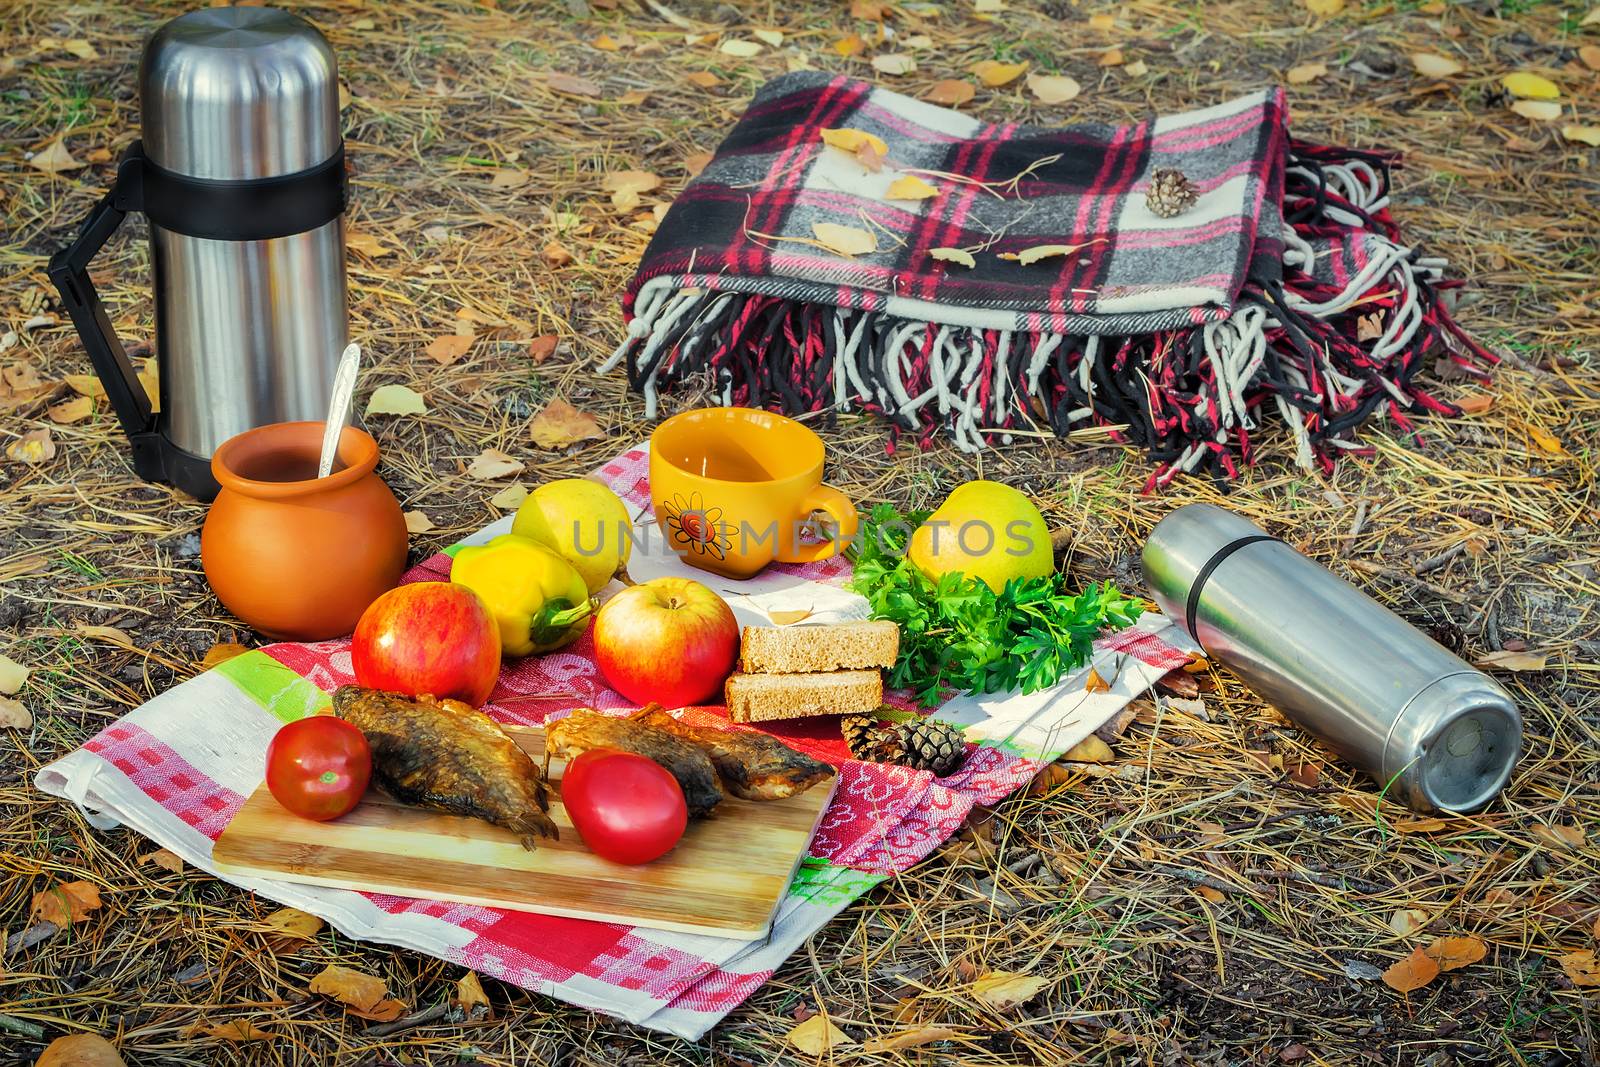 The autumn forest glade on the tablecloth prepared picnic of fruits, vegetables, fried fish, coffee in a thermos. Nearby is a warm blanket.